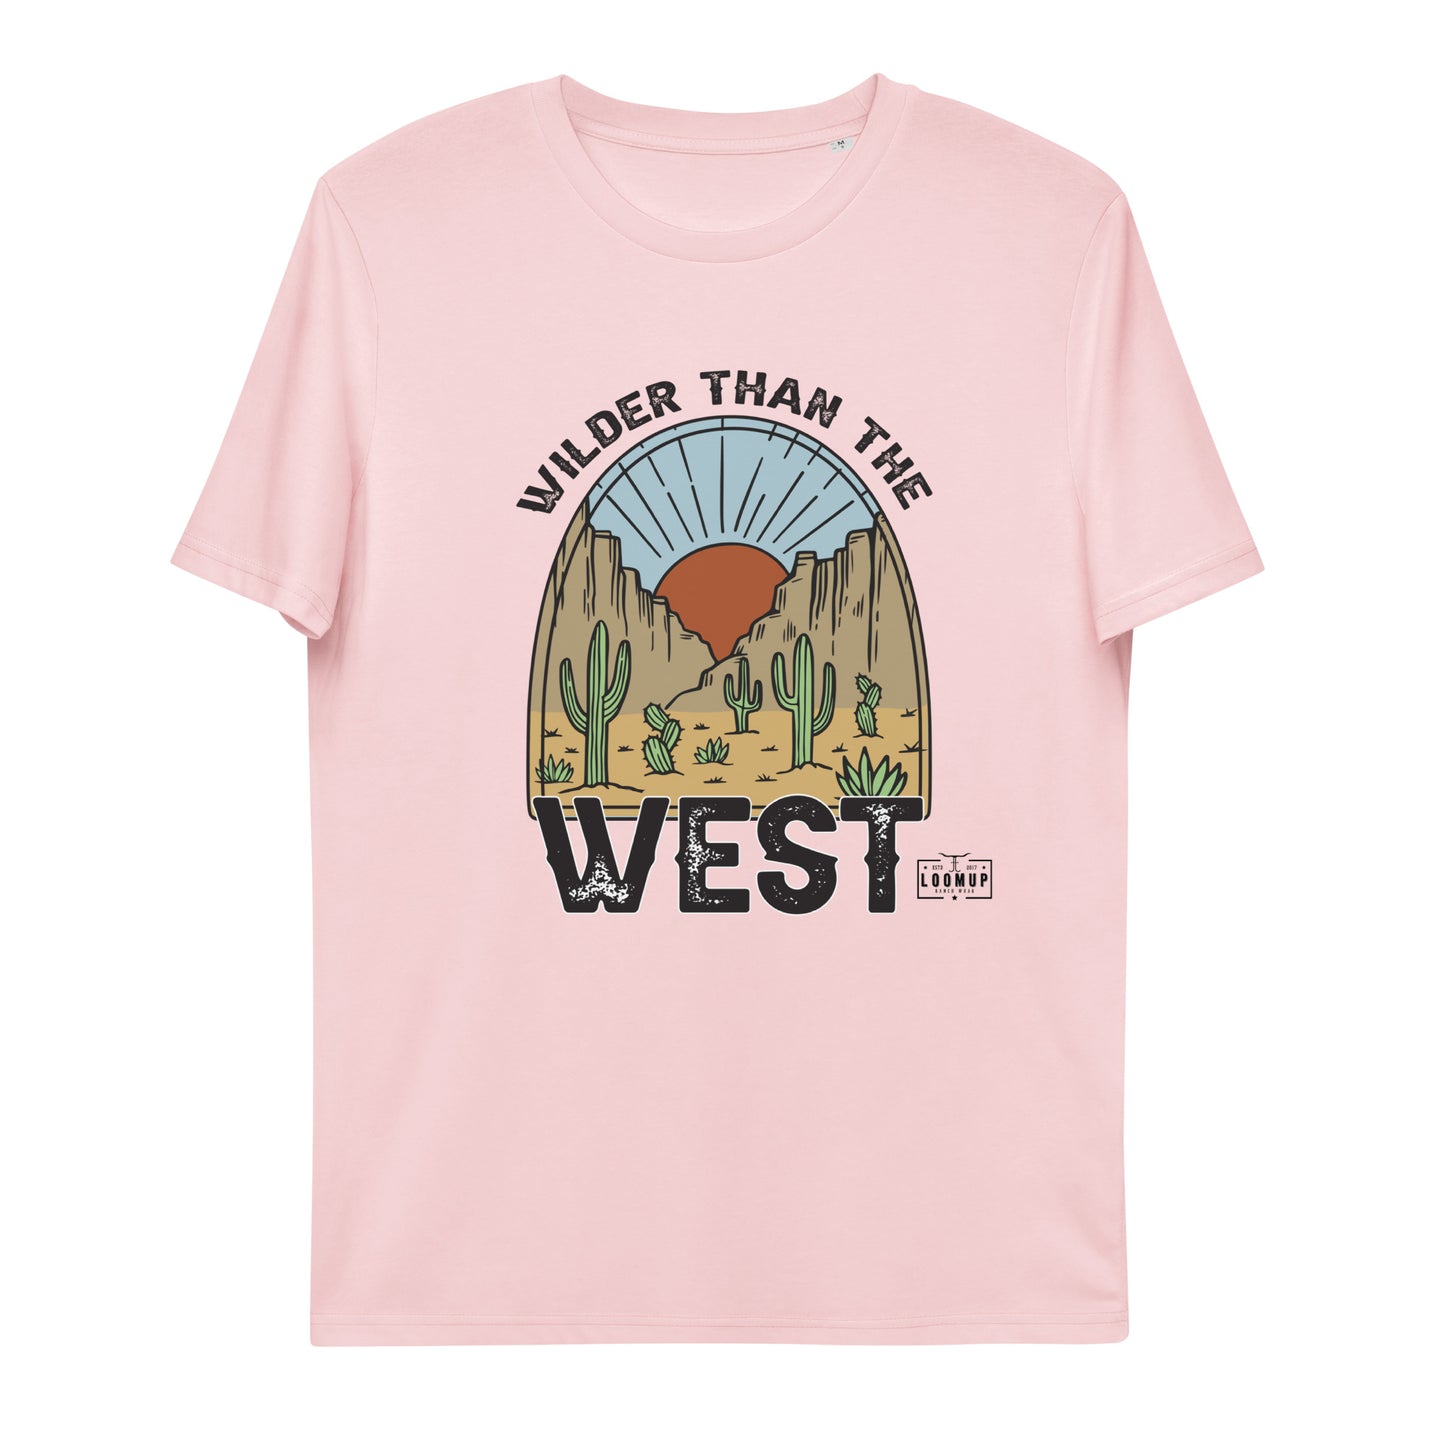 Wilder Than The West Tee